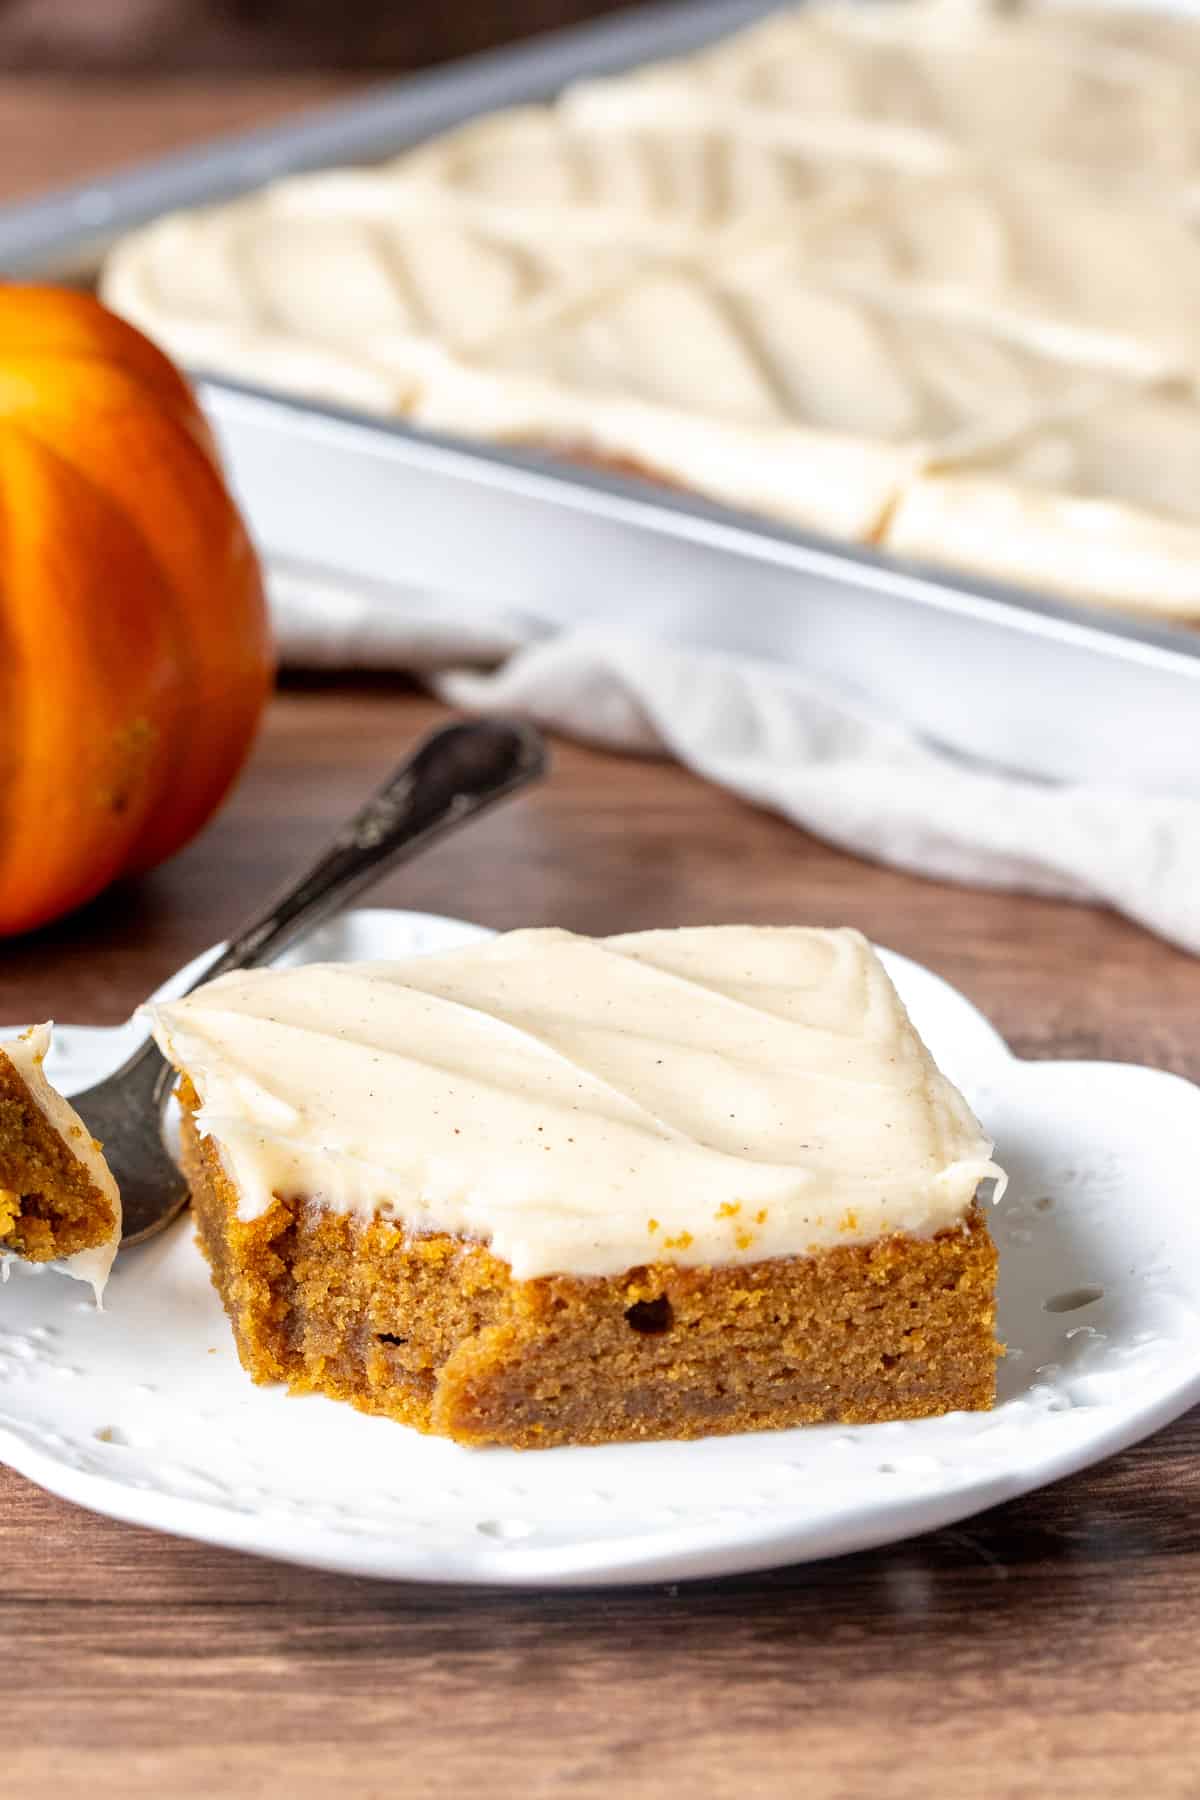 Pumpkin bar with cream cheese frosting with a bite taken out